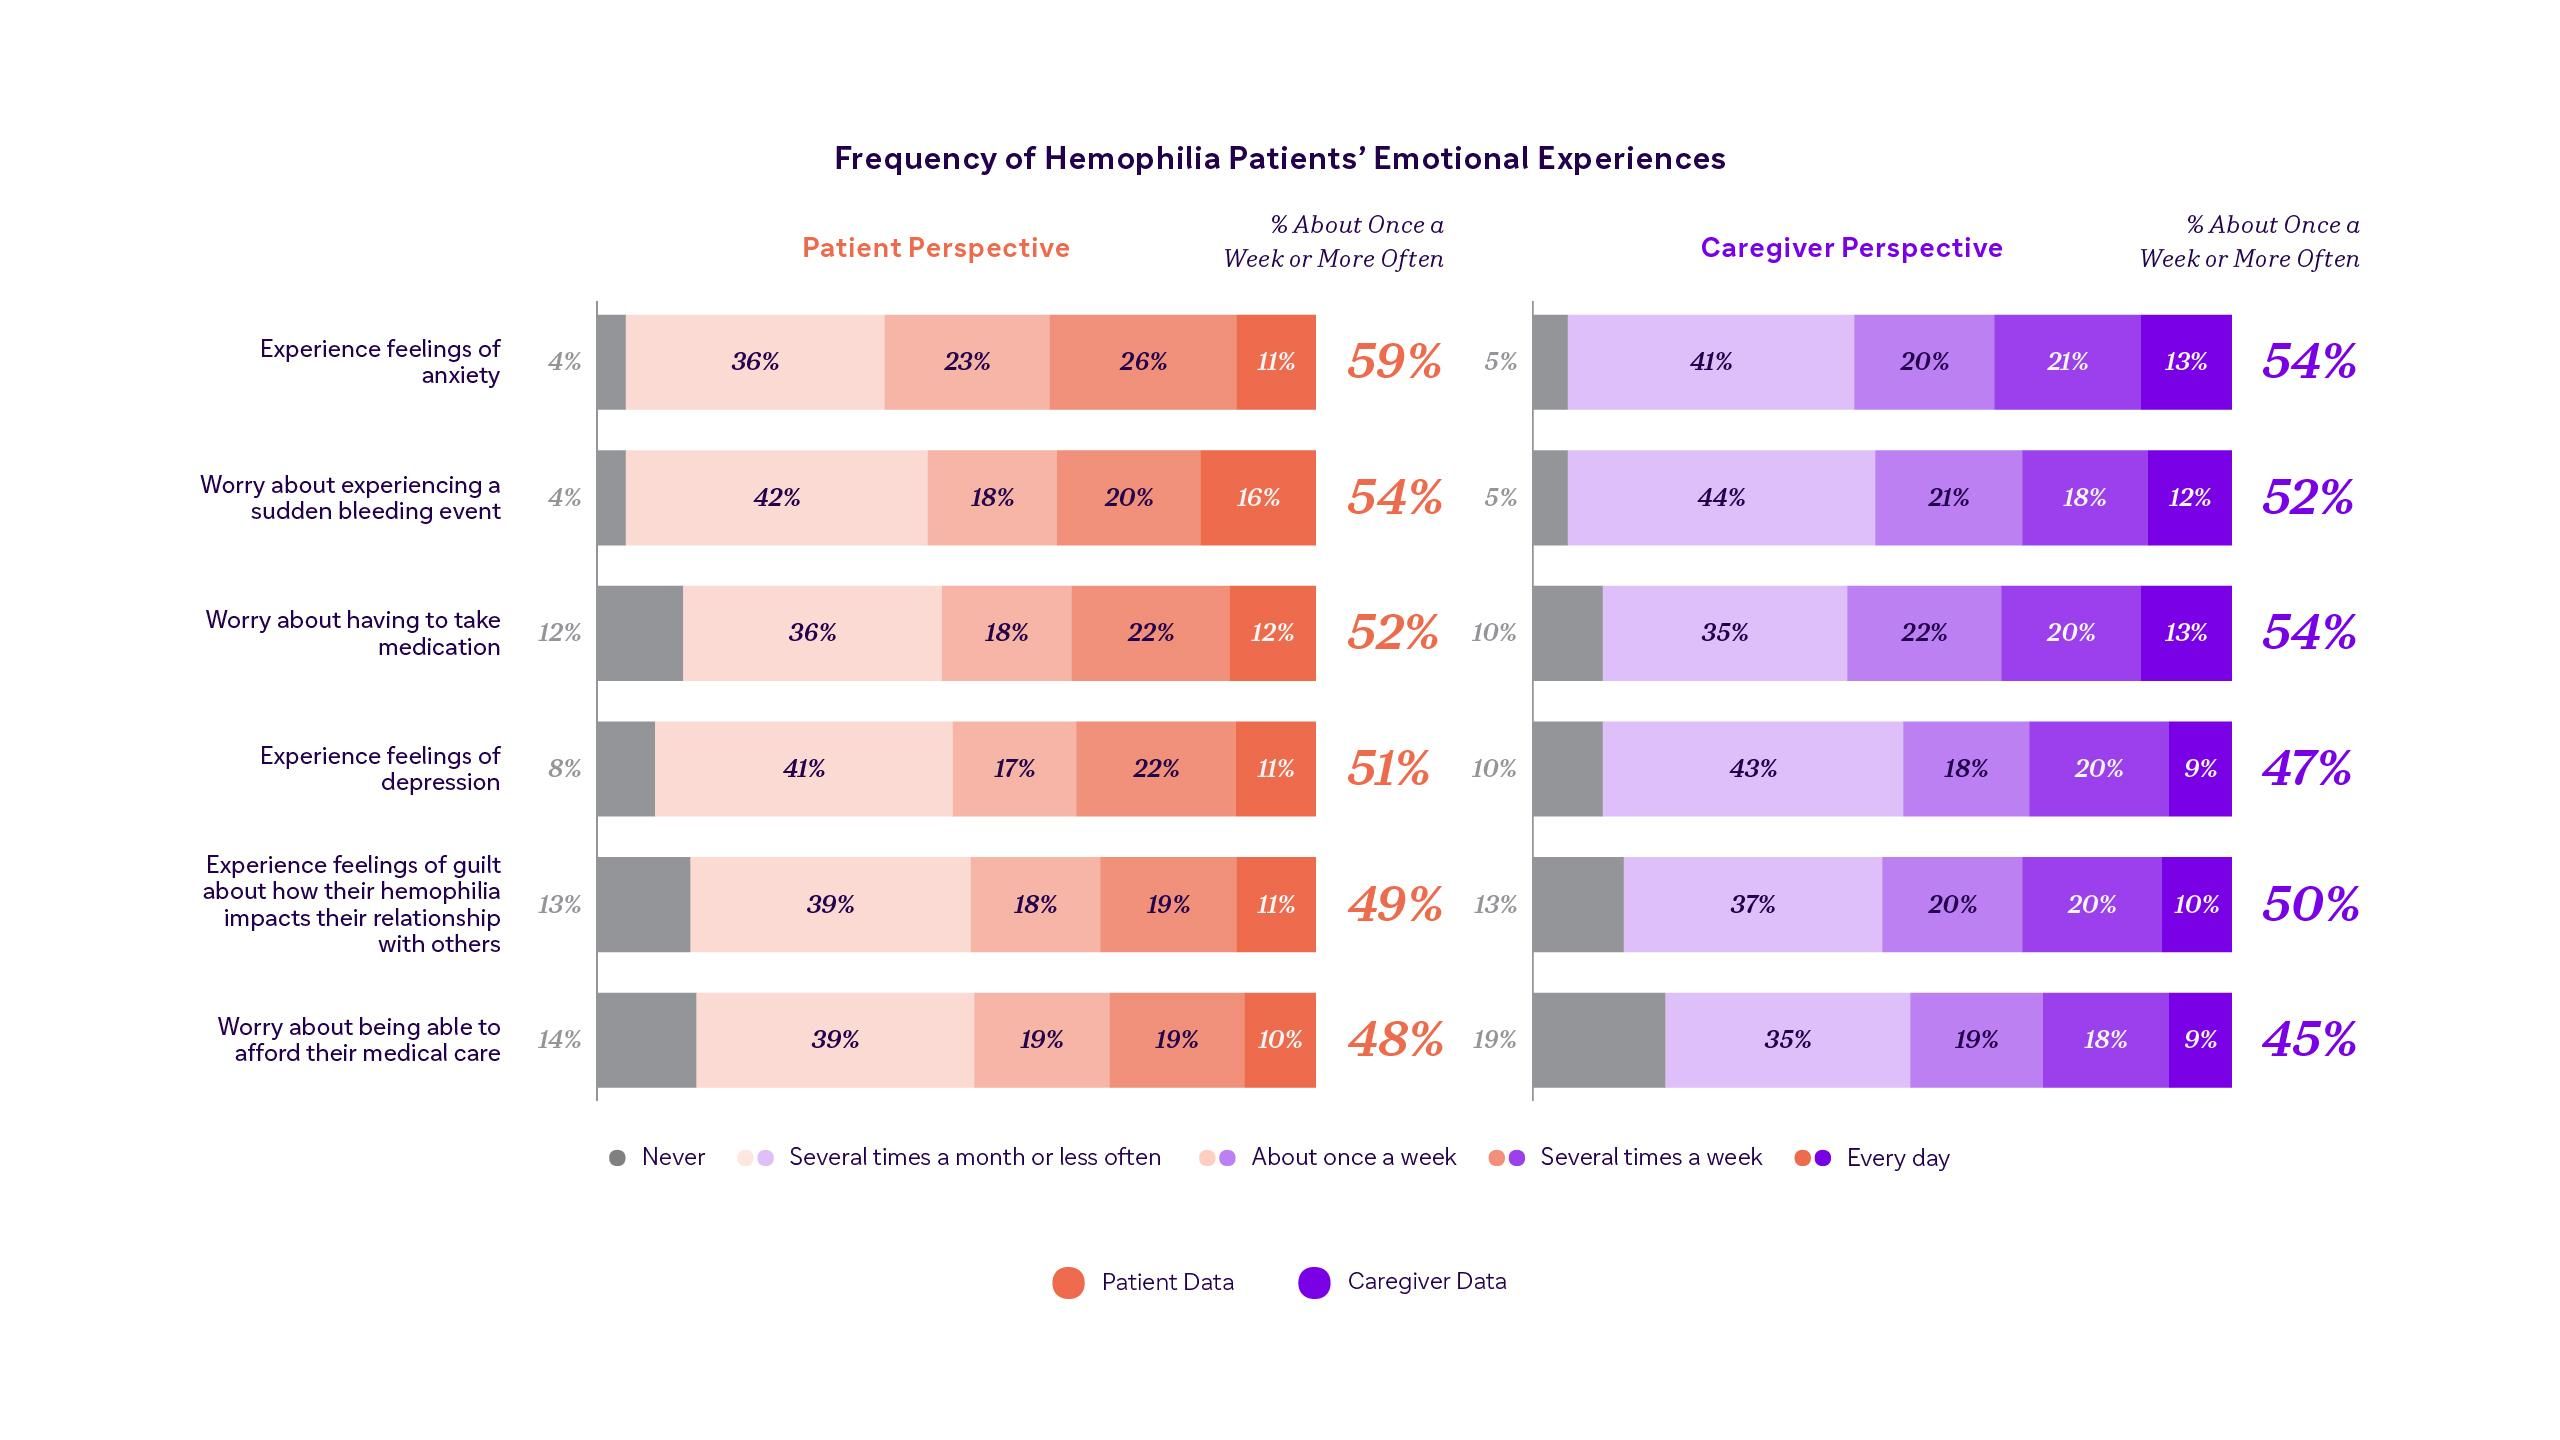 Sanofi’s global hemophilia survey looked at the frequency of hemophilia patients’ emotional experiences.